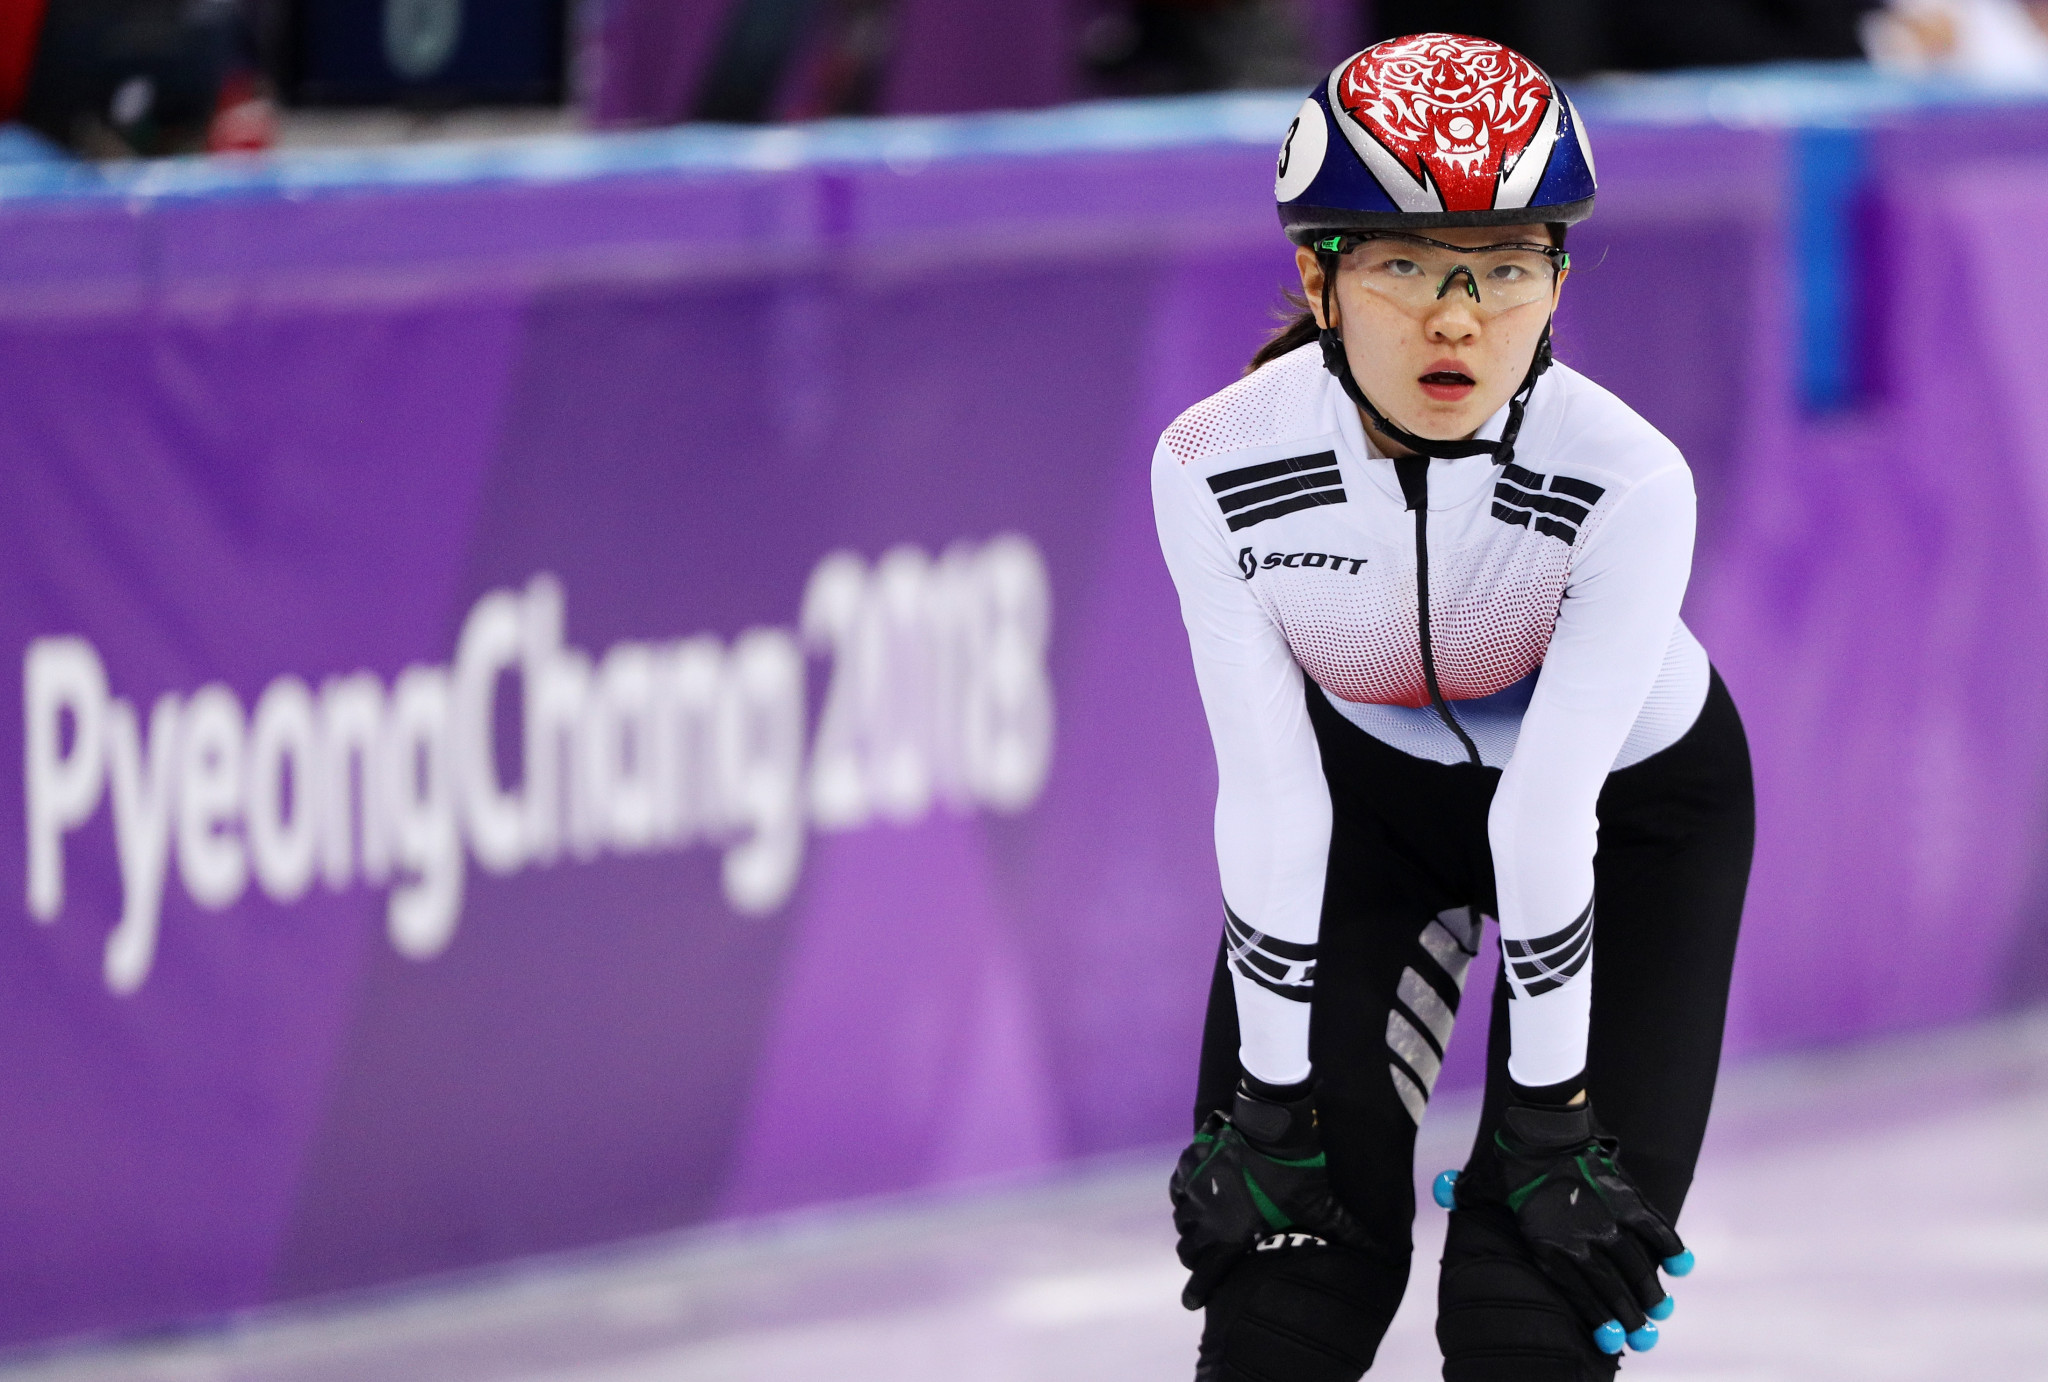 Double Olympic gold medallist Shim Suk-hee is currently not eligible for selection for Beijing 2022 as she is serving a two month ban ©Getty Images